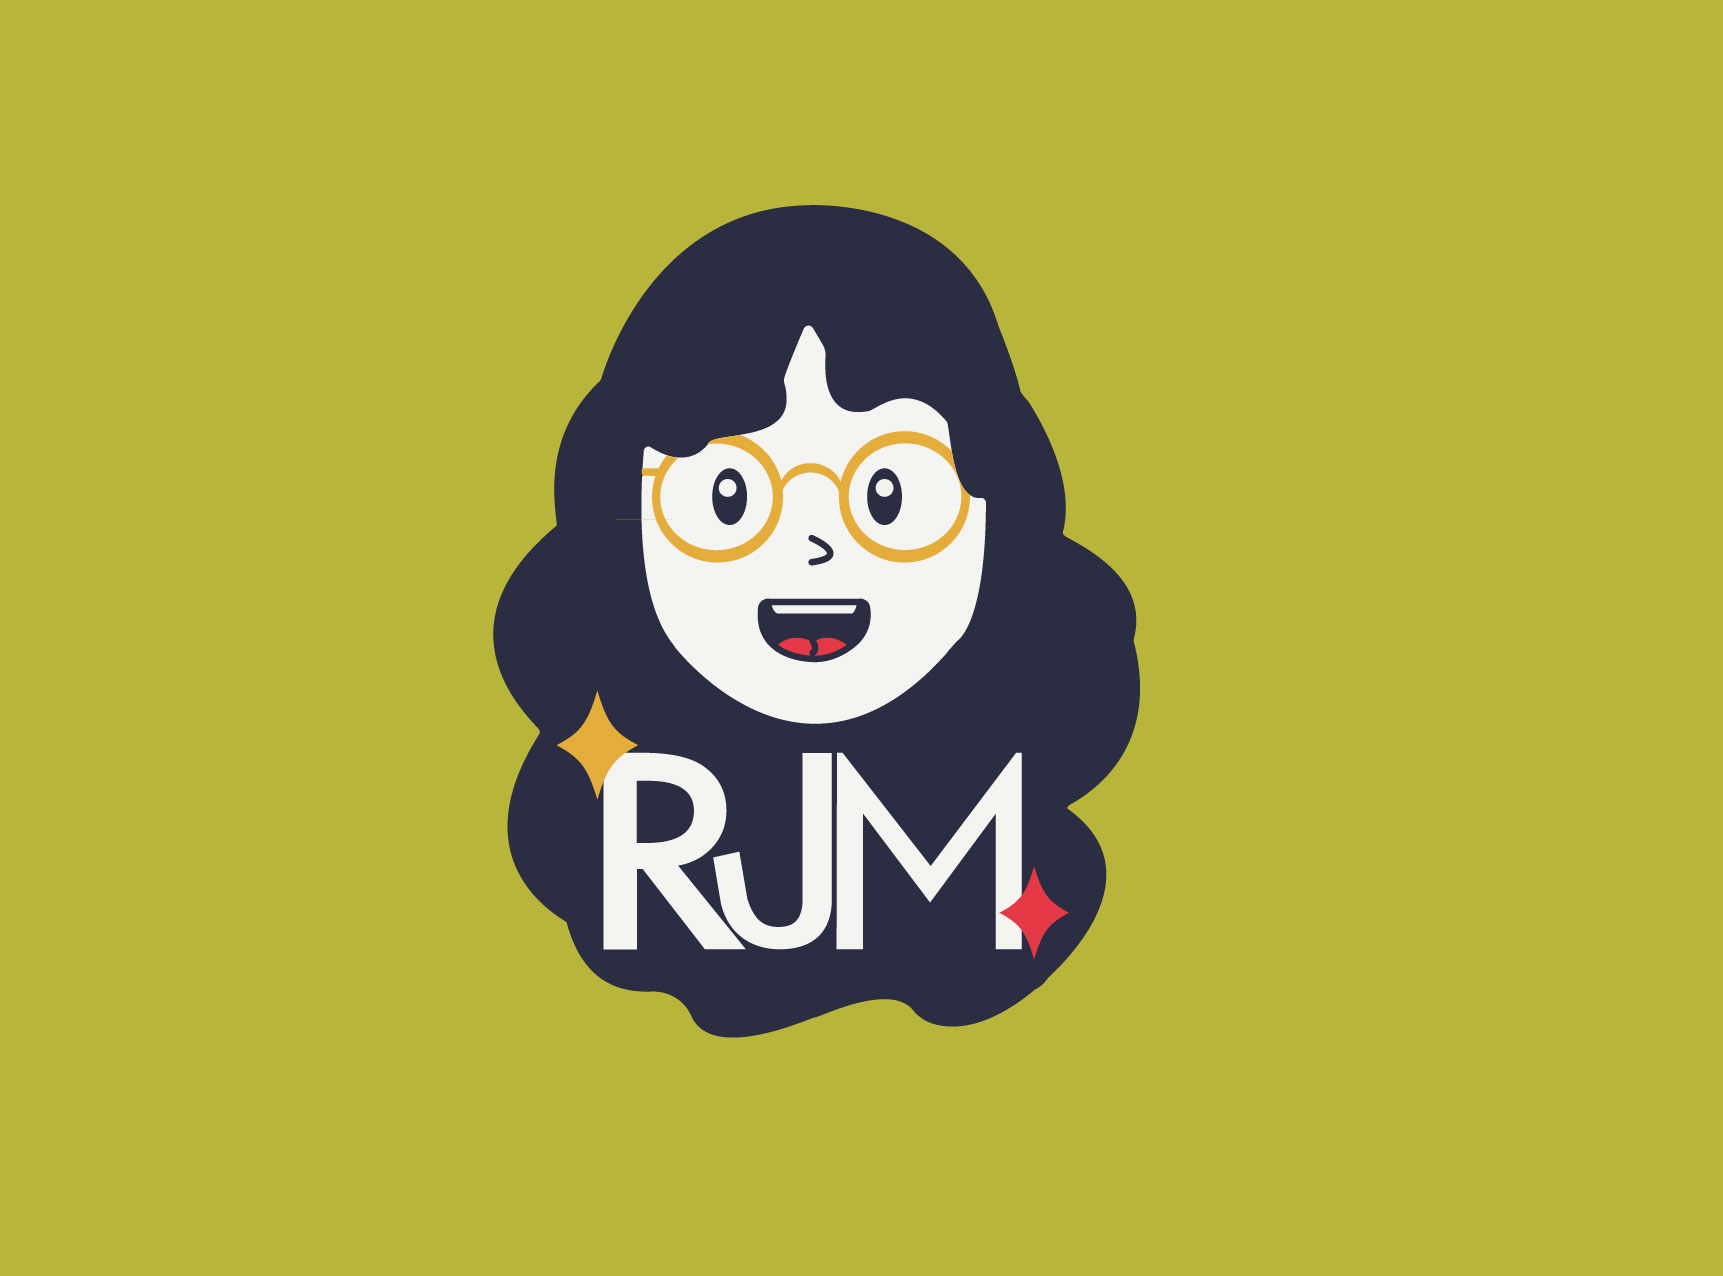 an alternative logo for the website, 
						it is the graphical depiction of a smiling girl with glasses